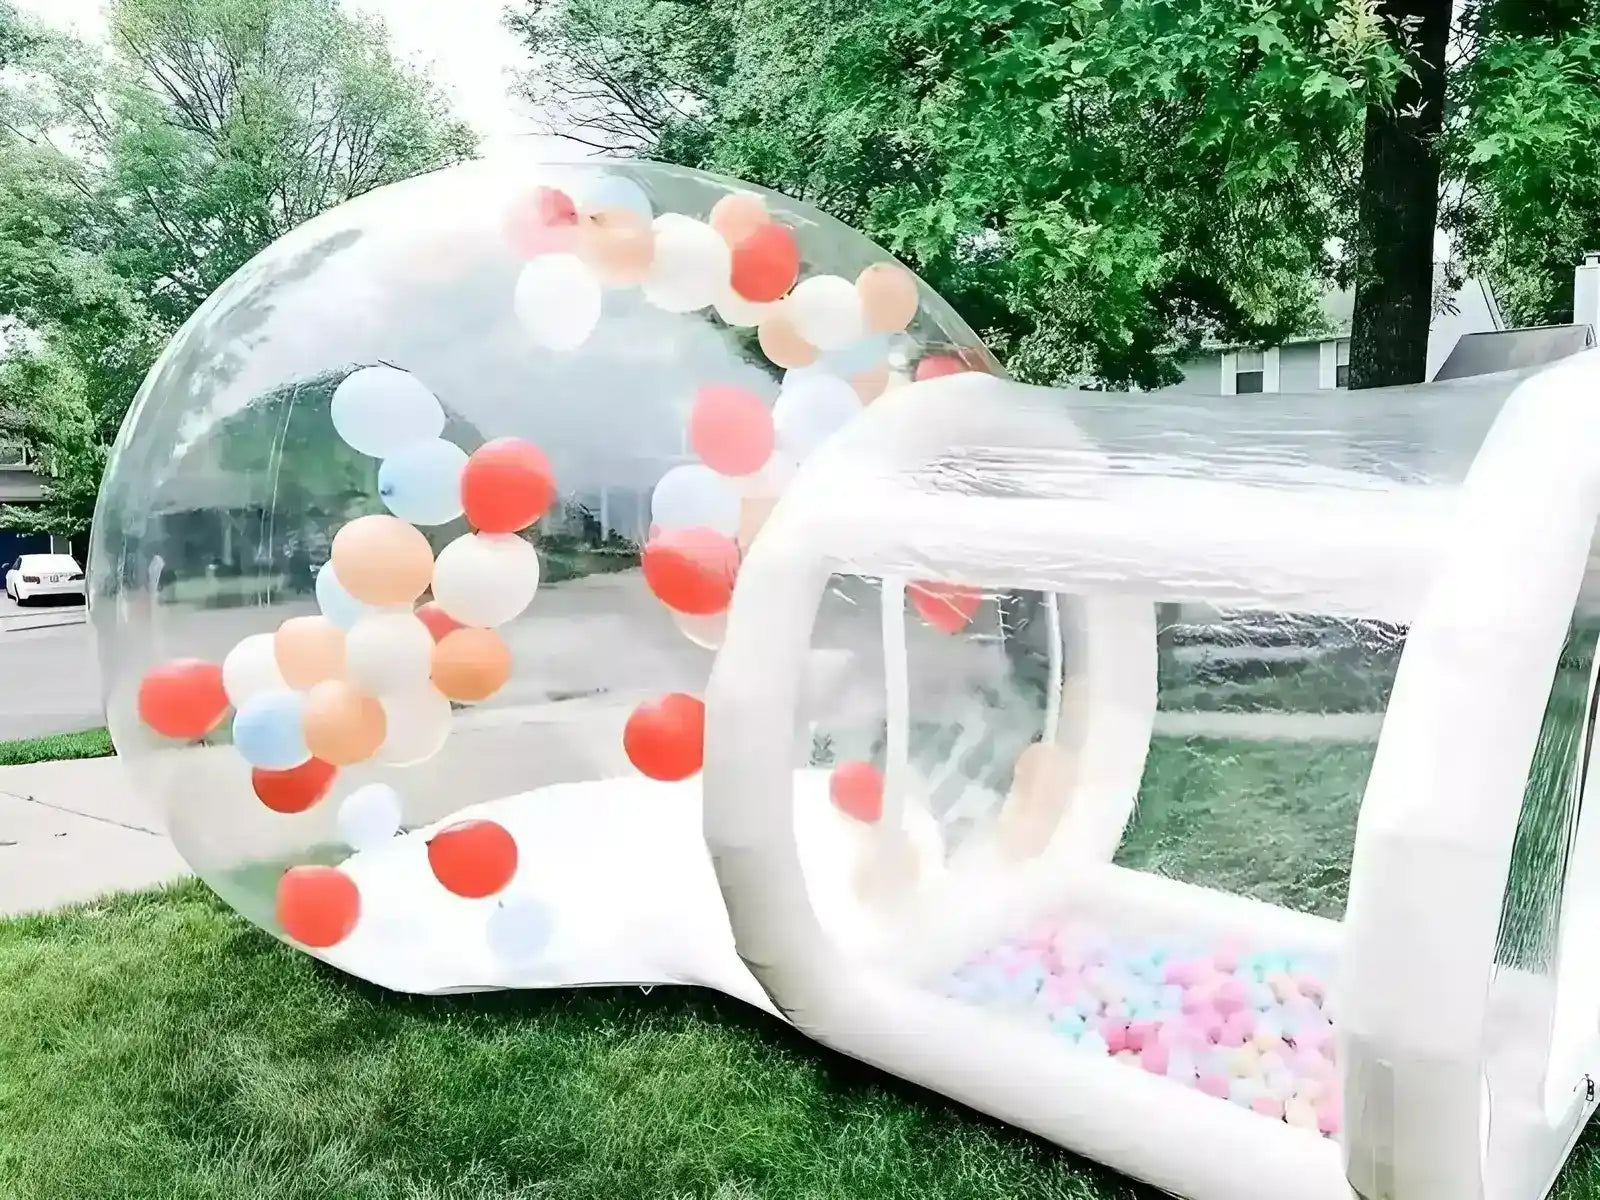 The Bubble House, transparent inflatable bubble tent, placed in the front yard with pit balls